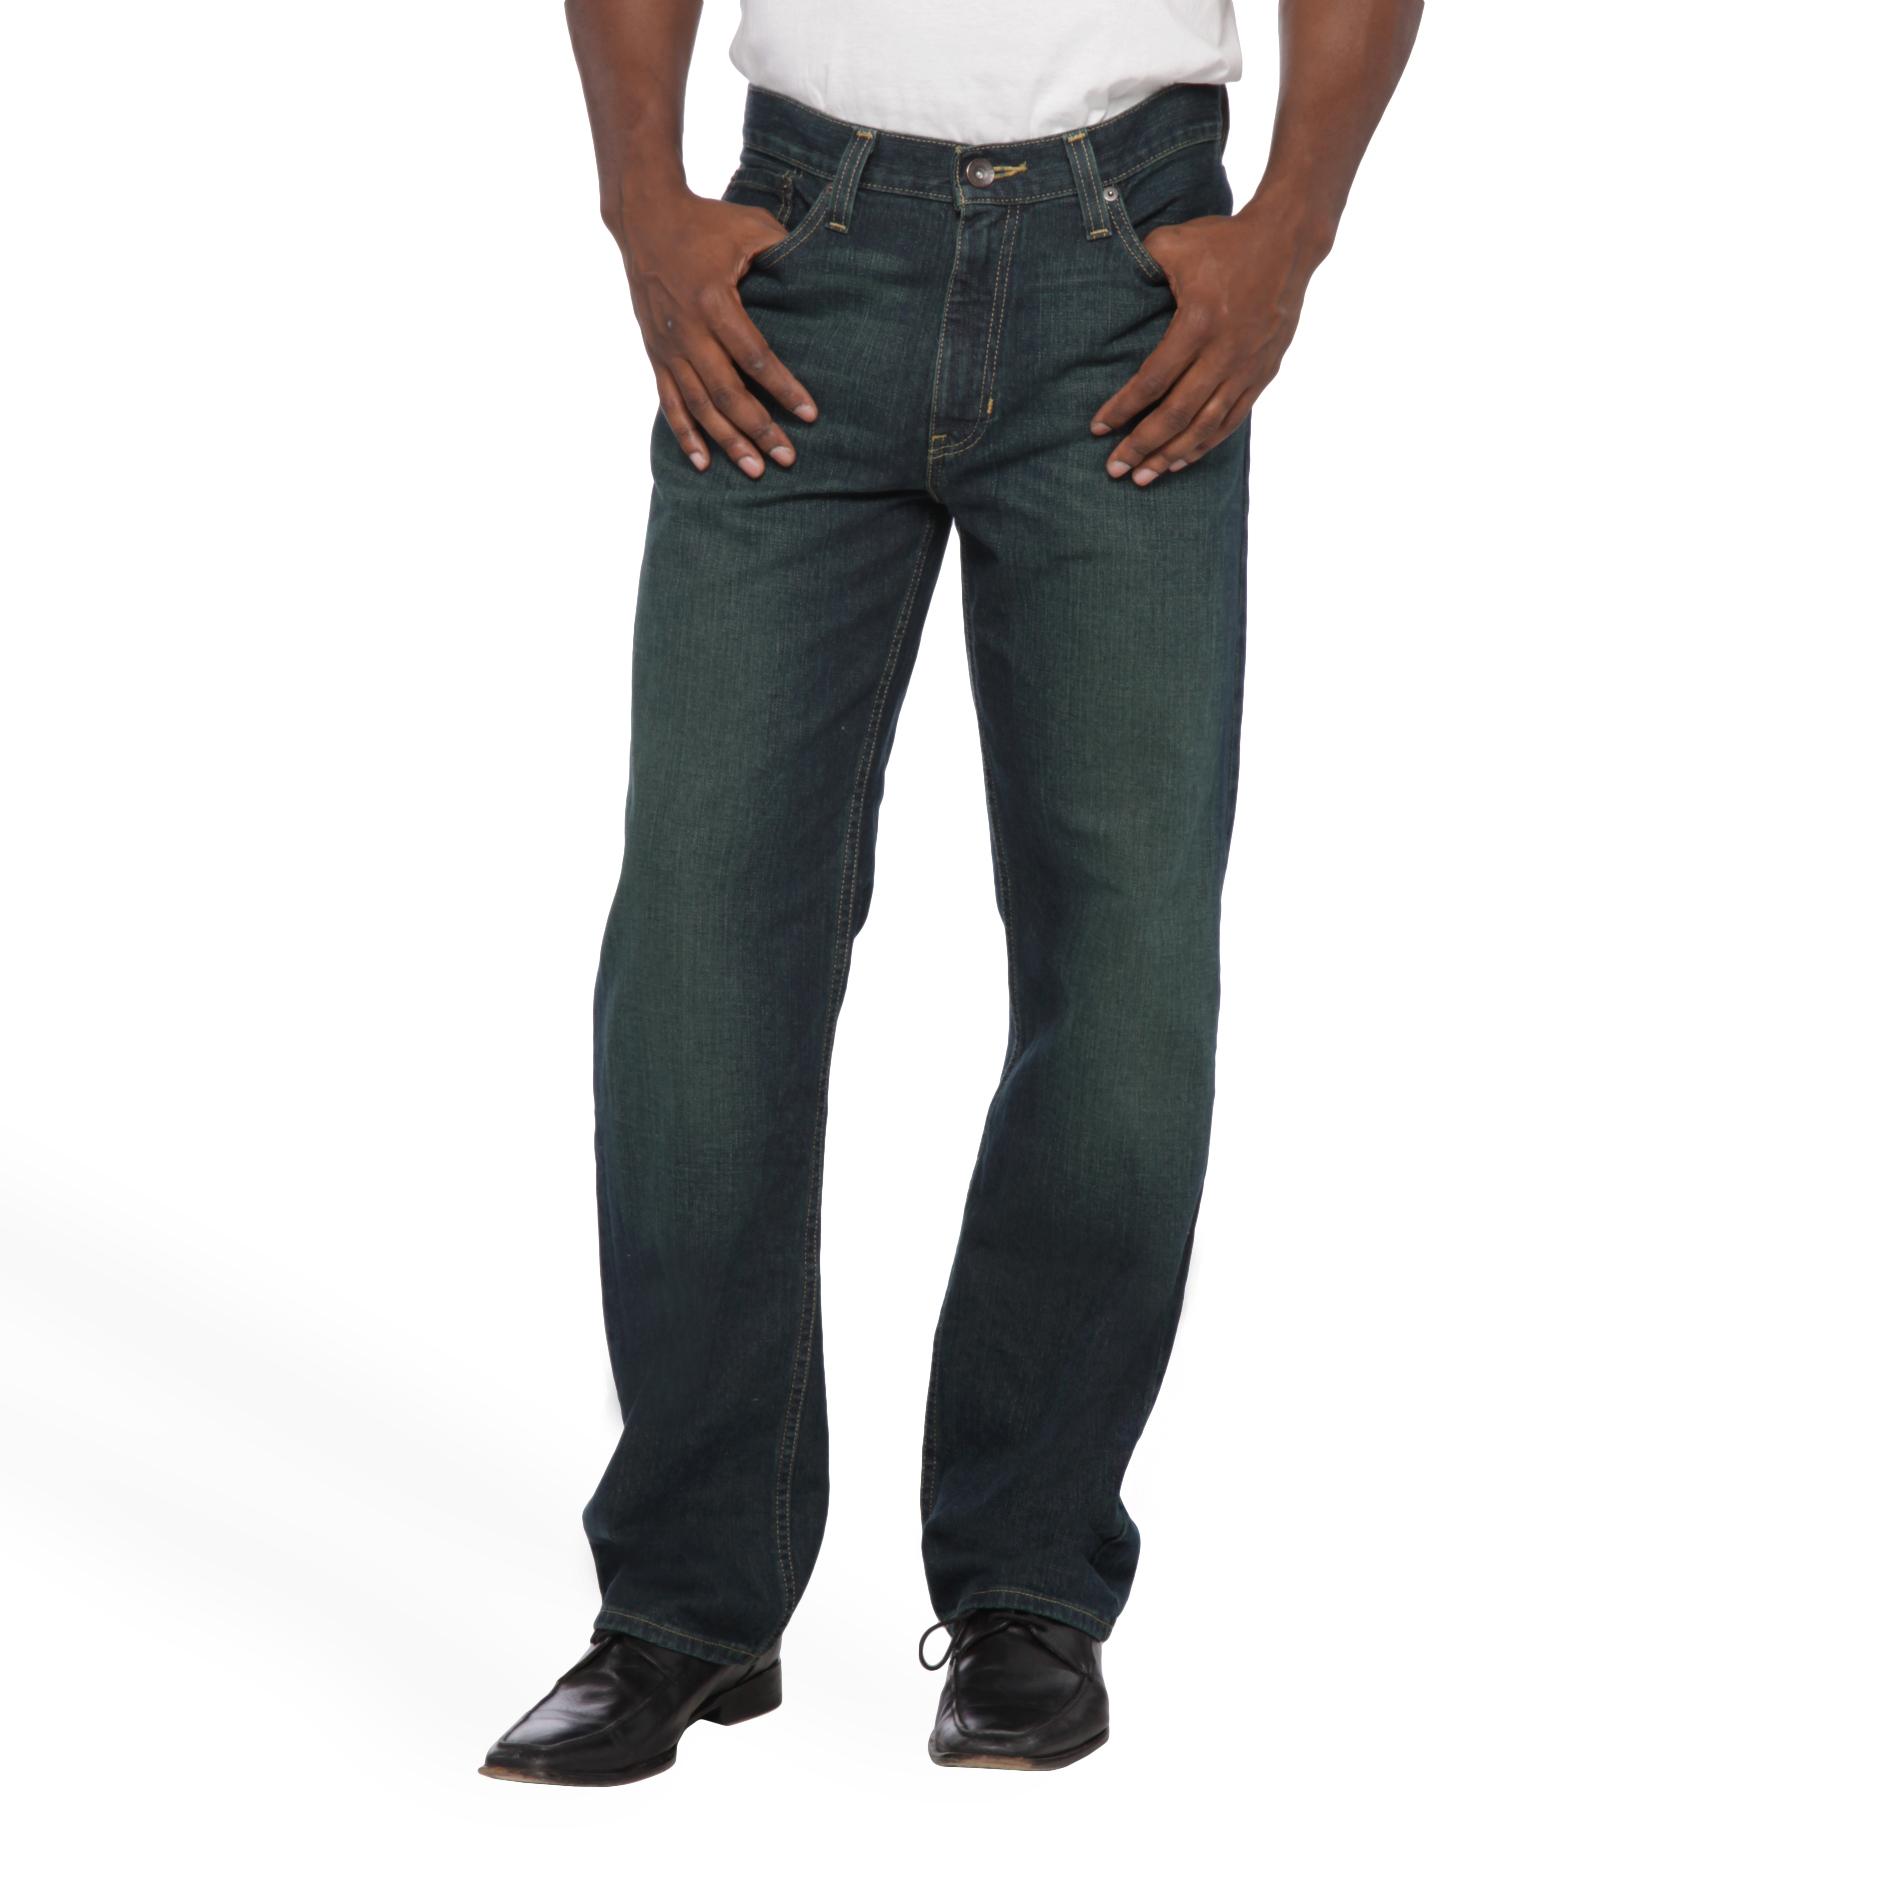 Roebuck & Co. Young Men's Relaxed Fit Straight Leg Jeans | Shop Your ...